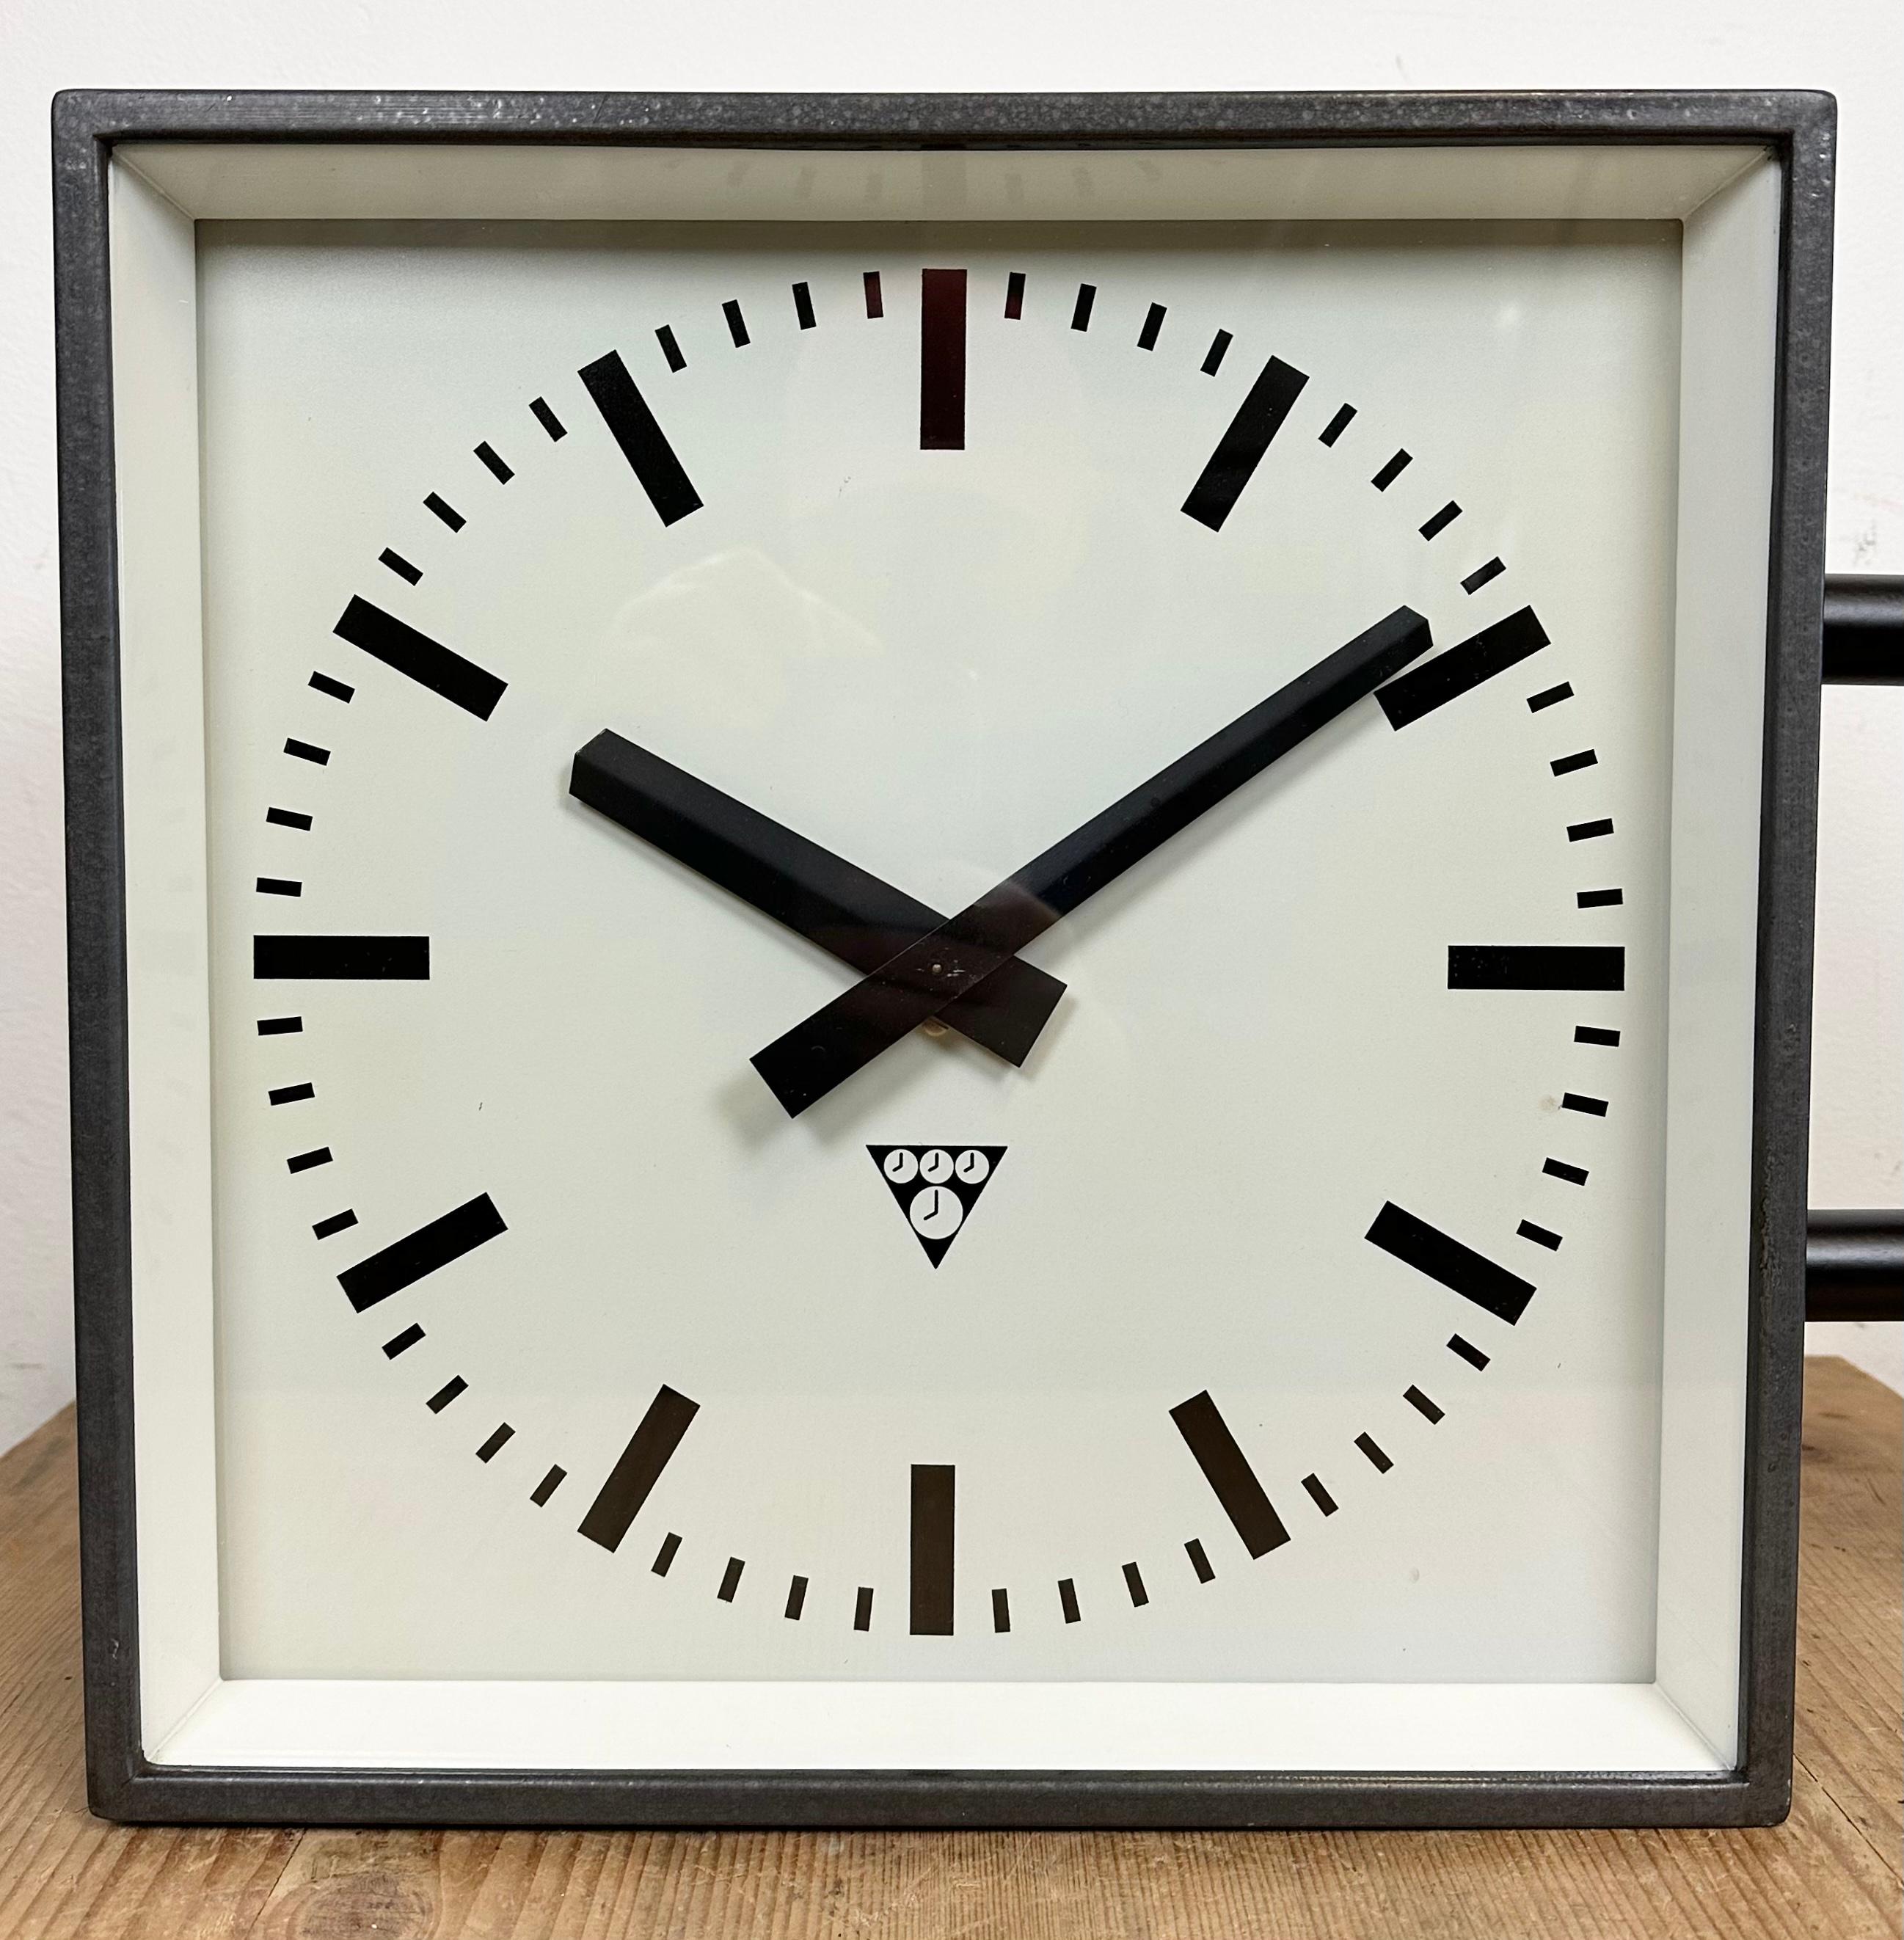 Czech Industrial Square Double-Sided Factory Wall Clock from Pragotron, 1970s